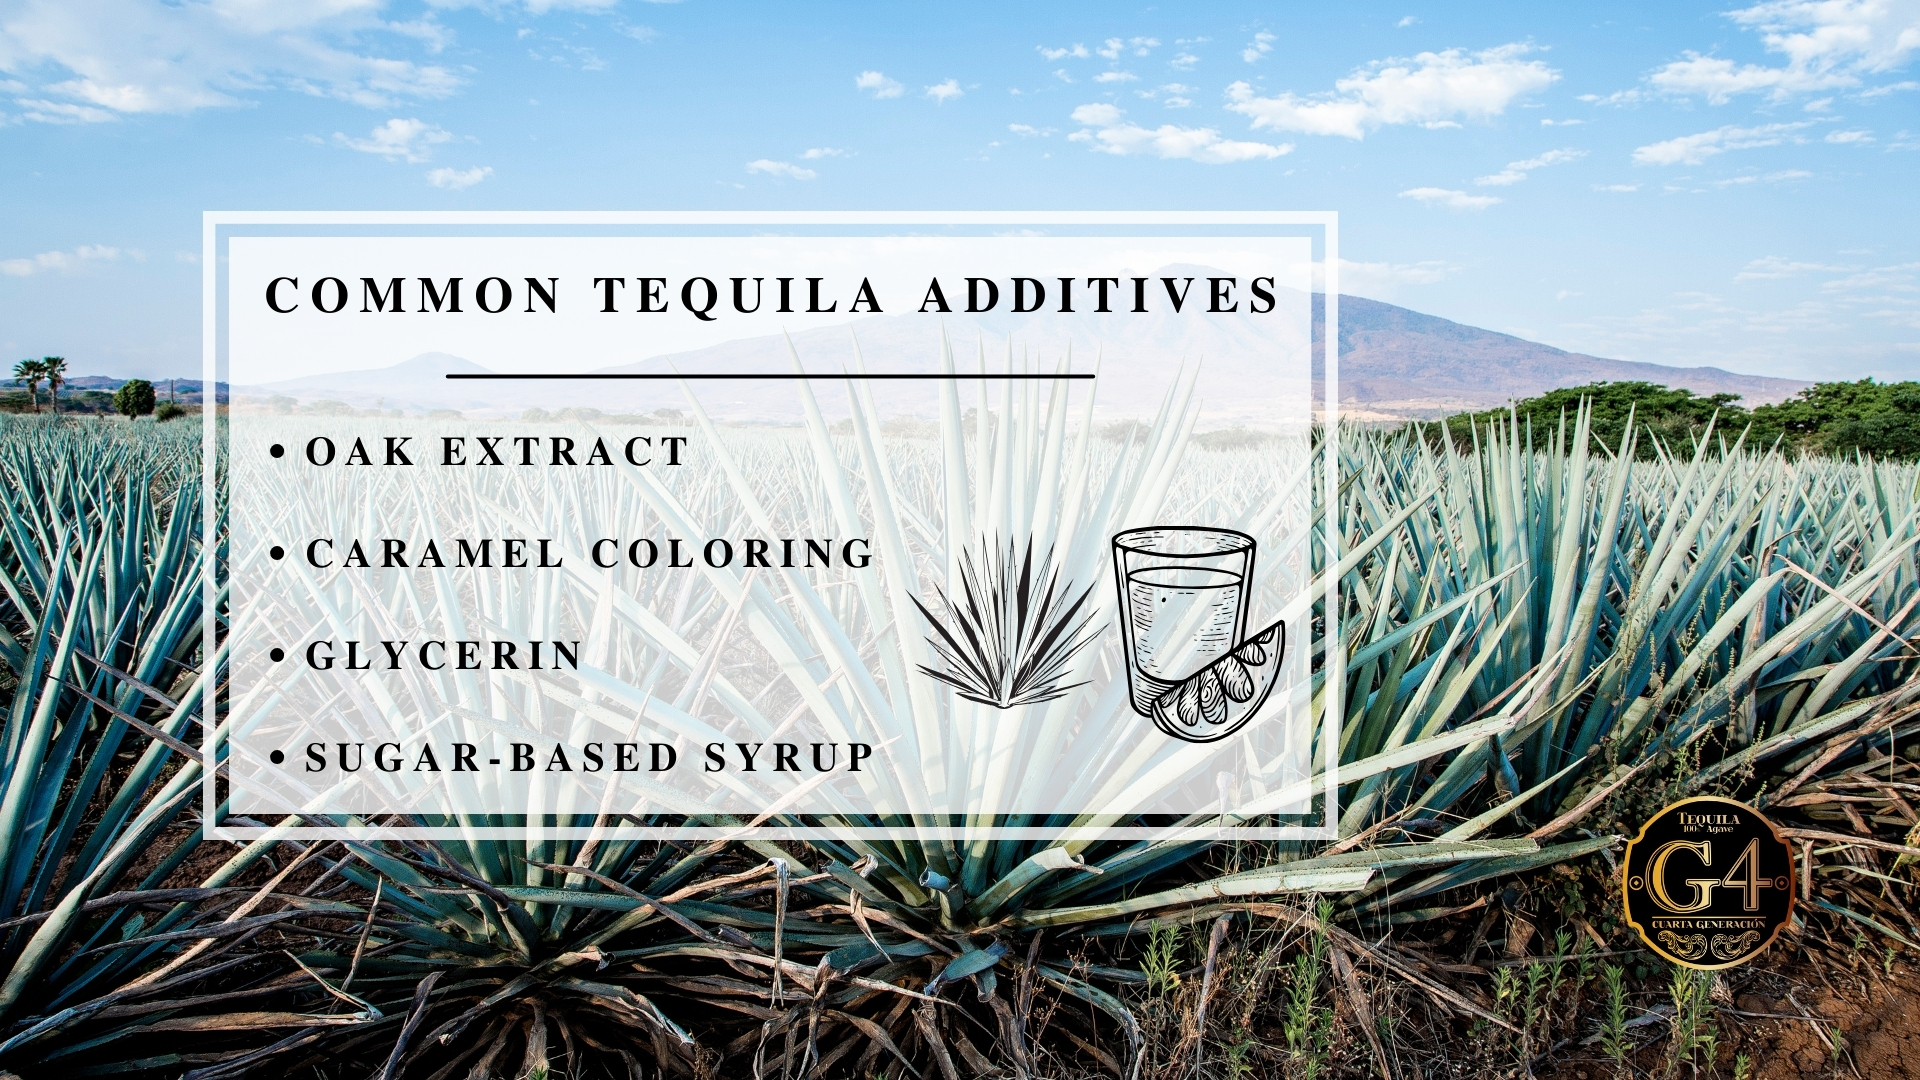 Infographic image of common tequila additives